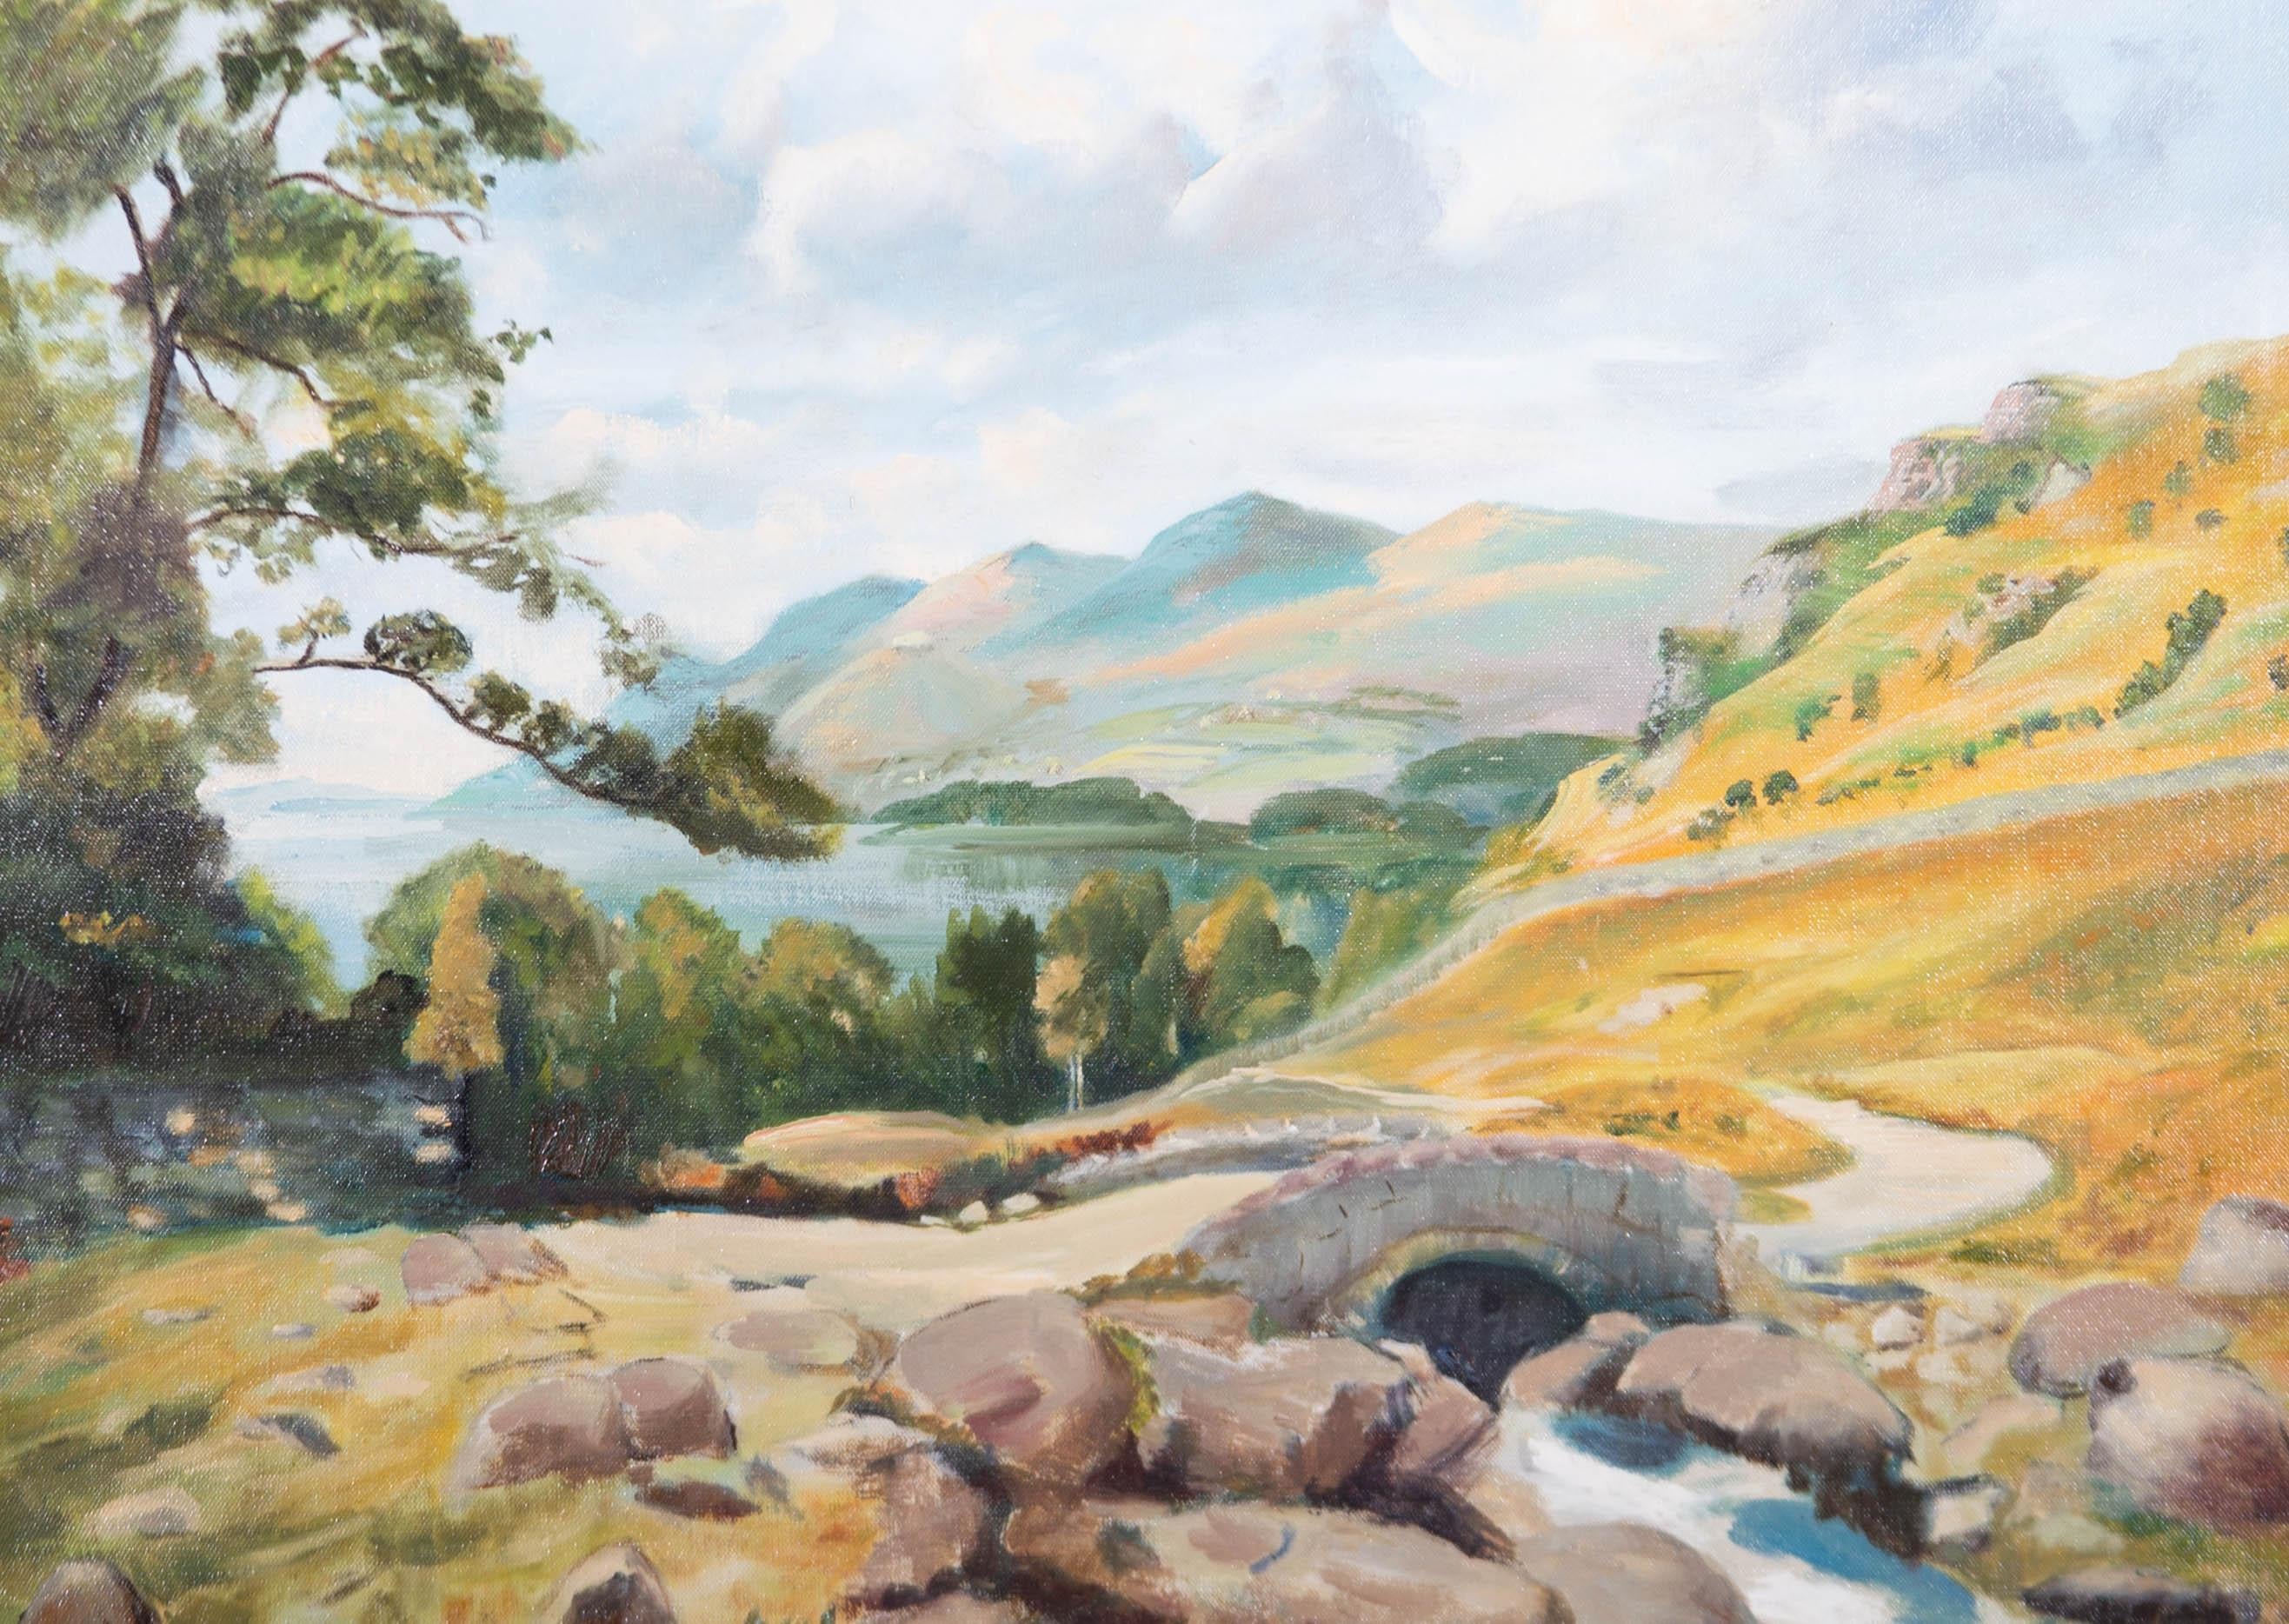 Contemporary Oil - Highland View with Arch Bridge - Painting by Unknown